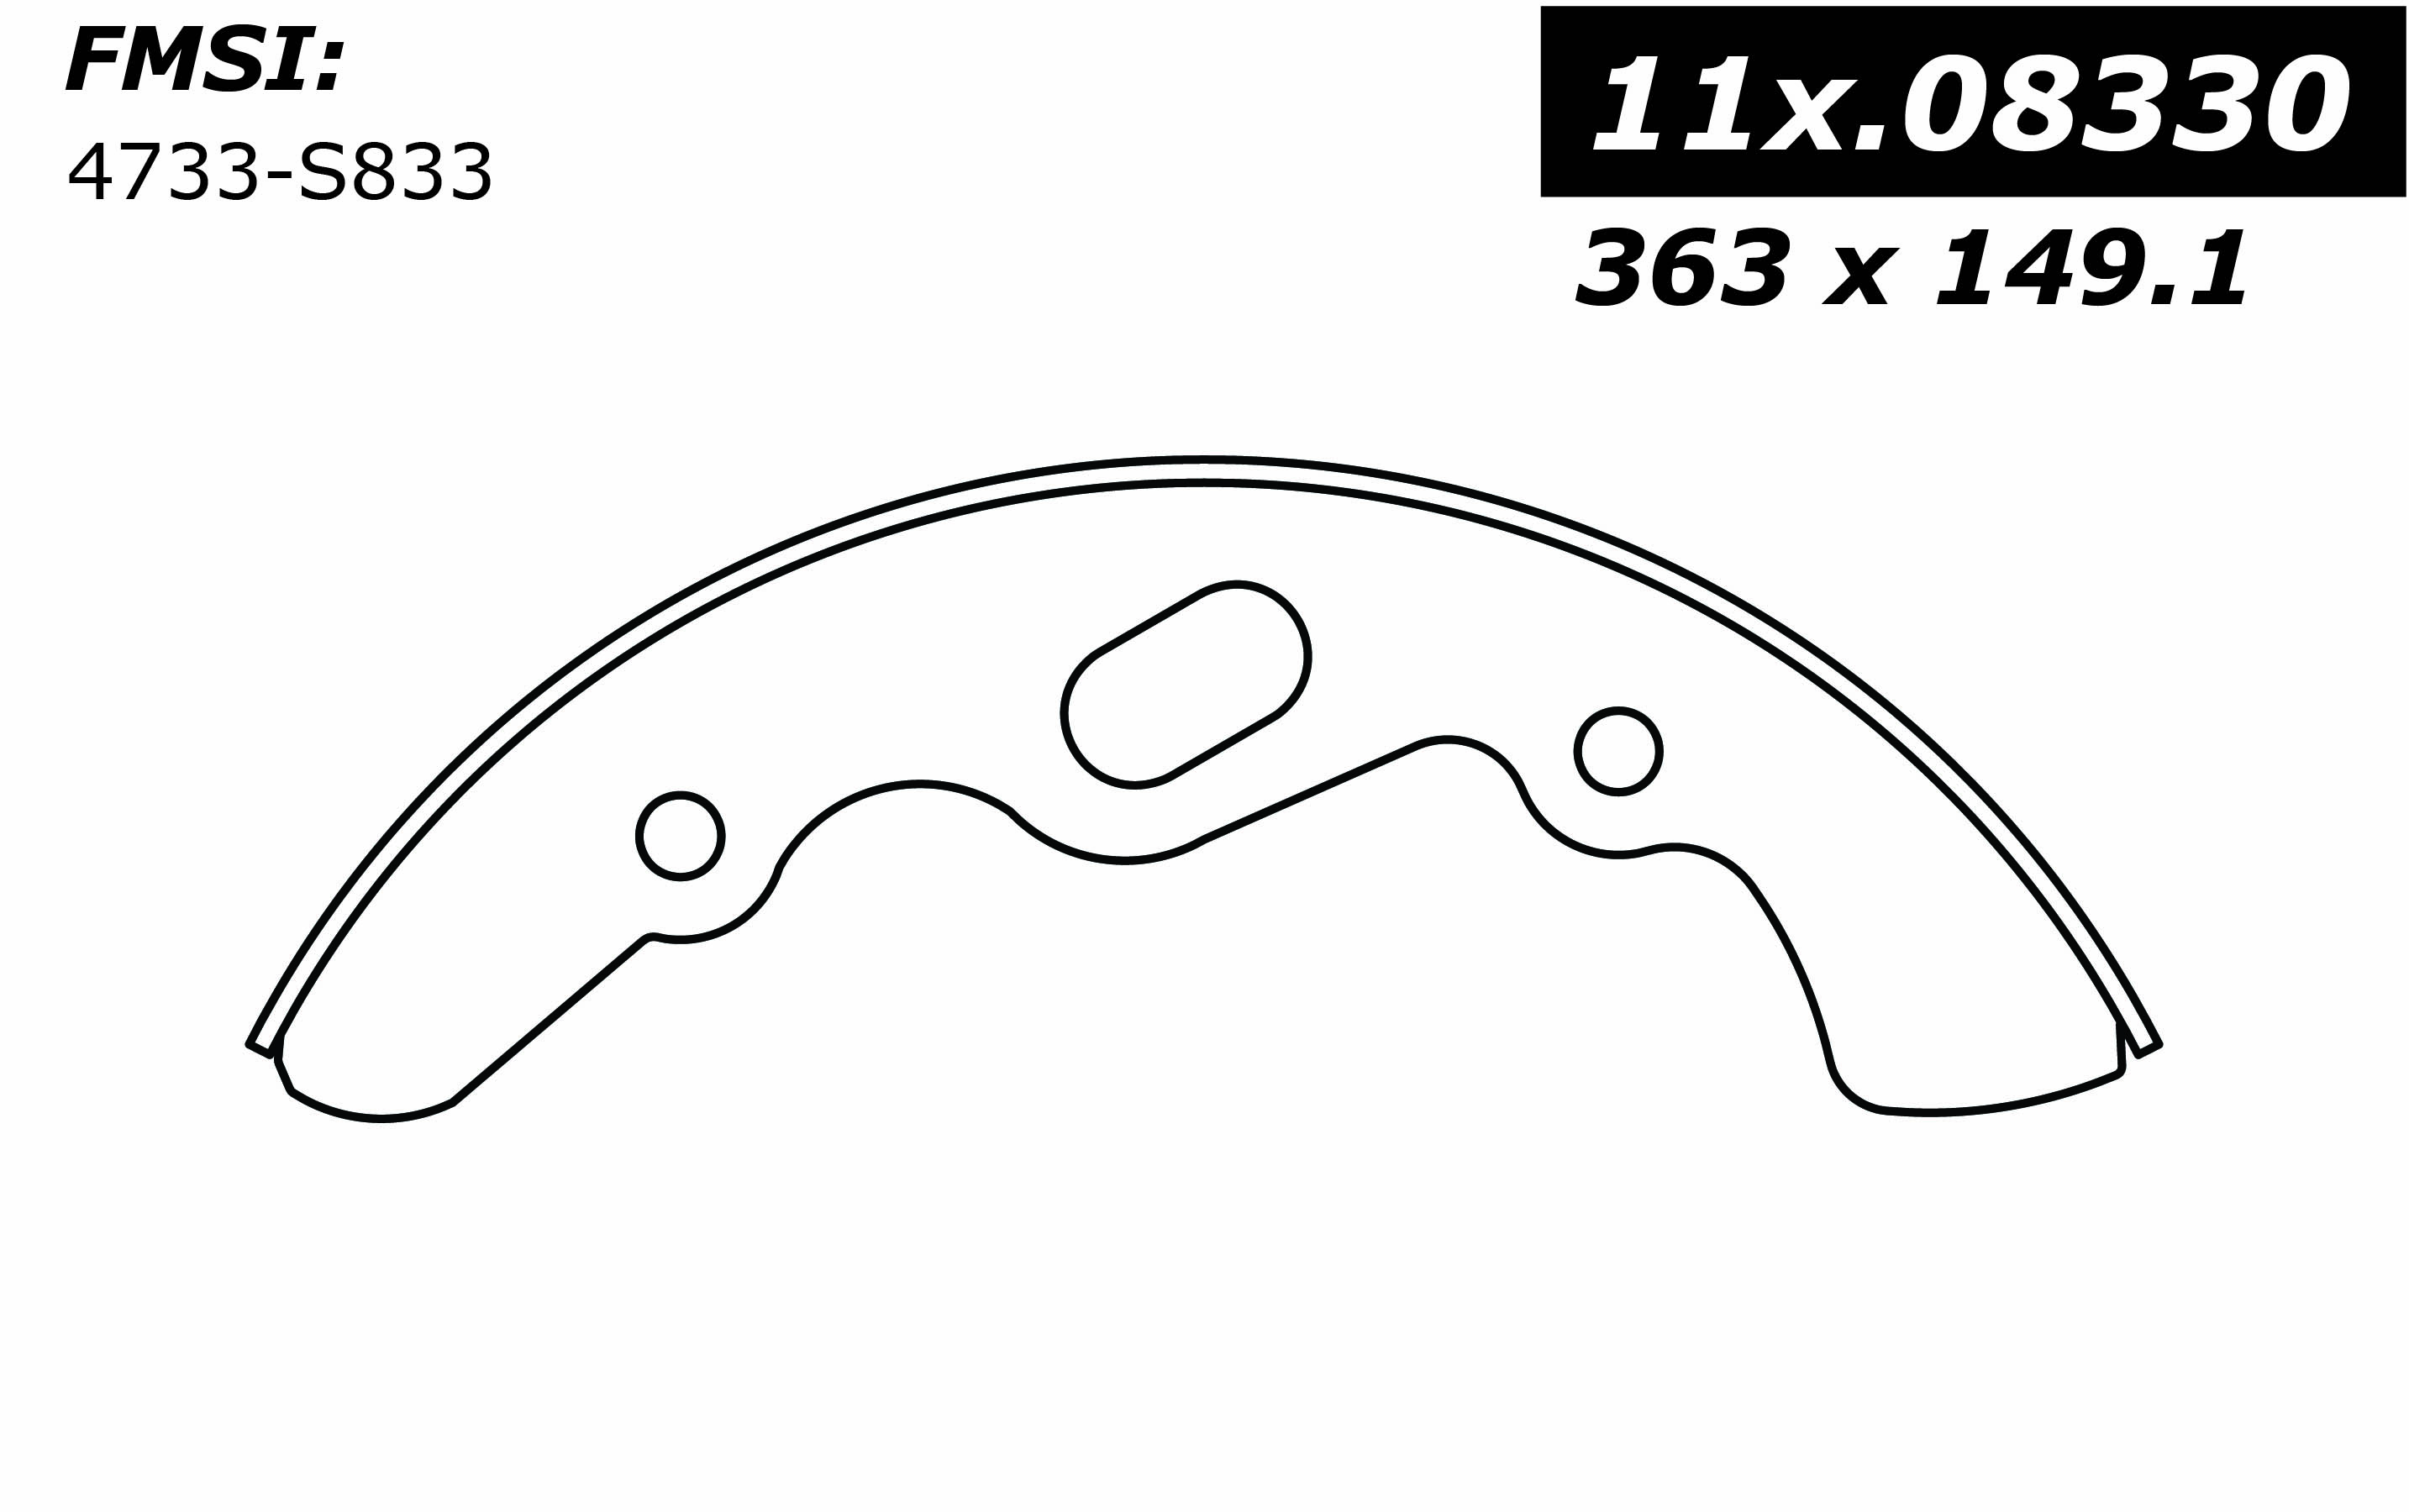 112.08330 Riveted Brake Shoes 805890634577